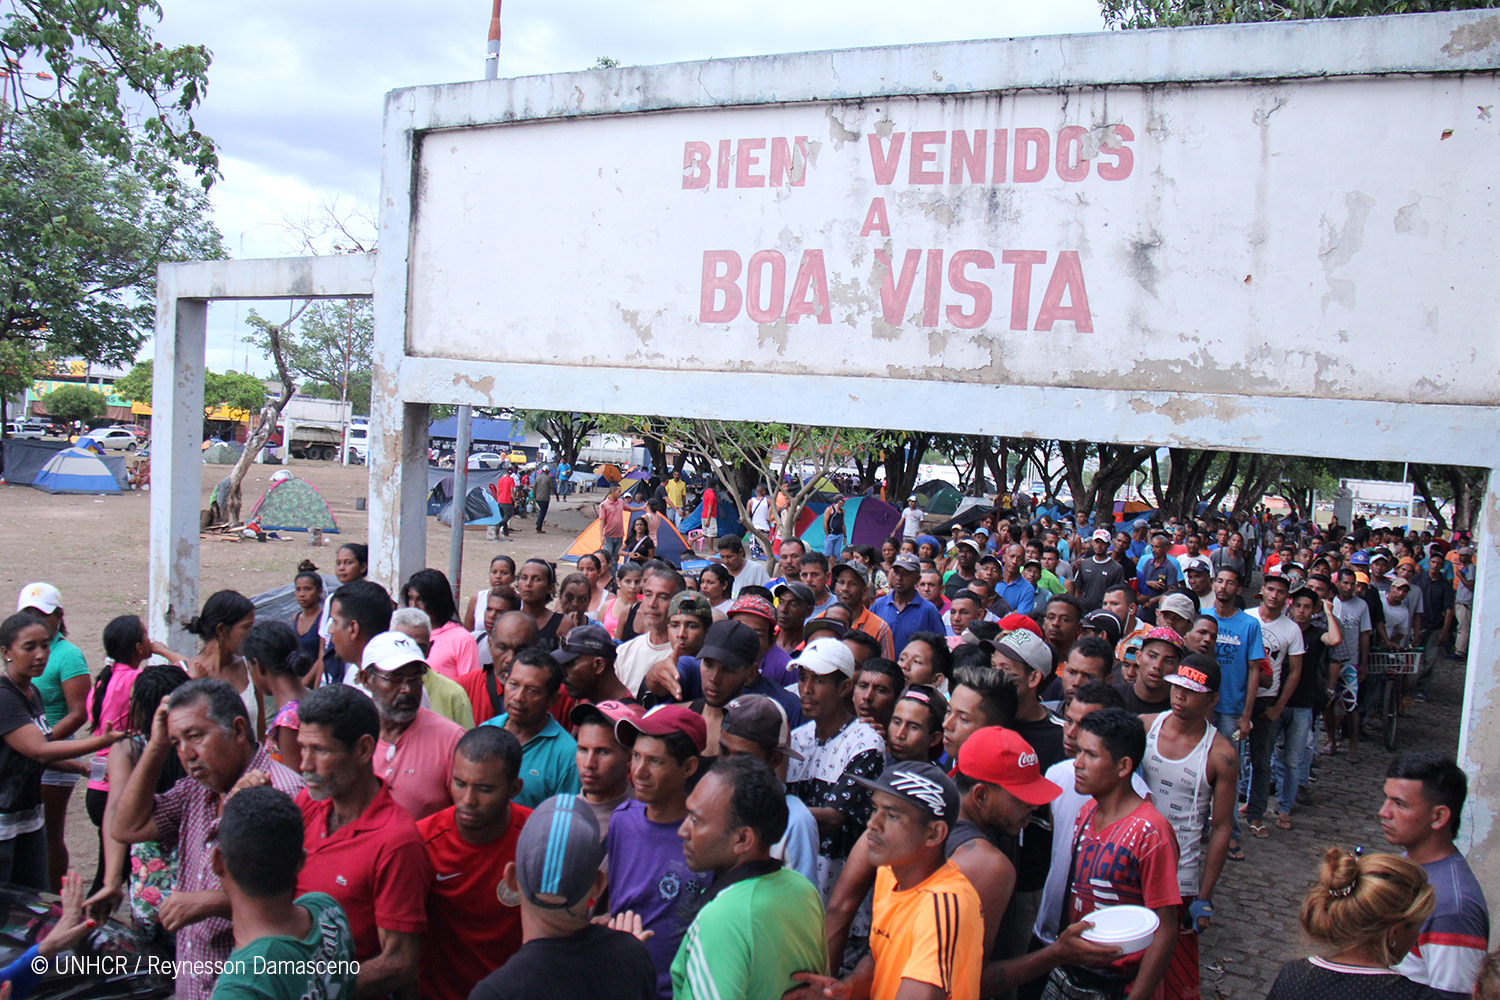 Despite efforts, several shelters created in Roraima by the government and supported by UNHCR and its partners have exceeded the recommended capacity, and as a result, people resort to sleeping on the streets or in public spaces in Boa Vista in Roraima state. Local communities support the arrivals by providing and distributing food. (© UNHCR/Reynesson Damasceno)